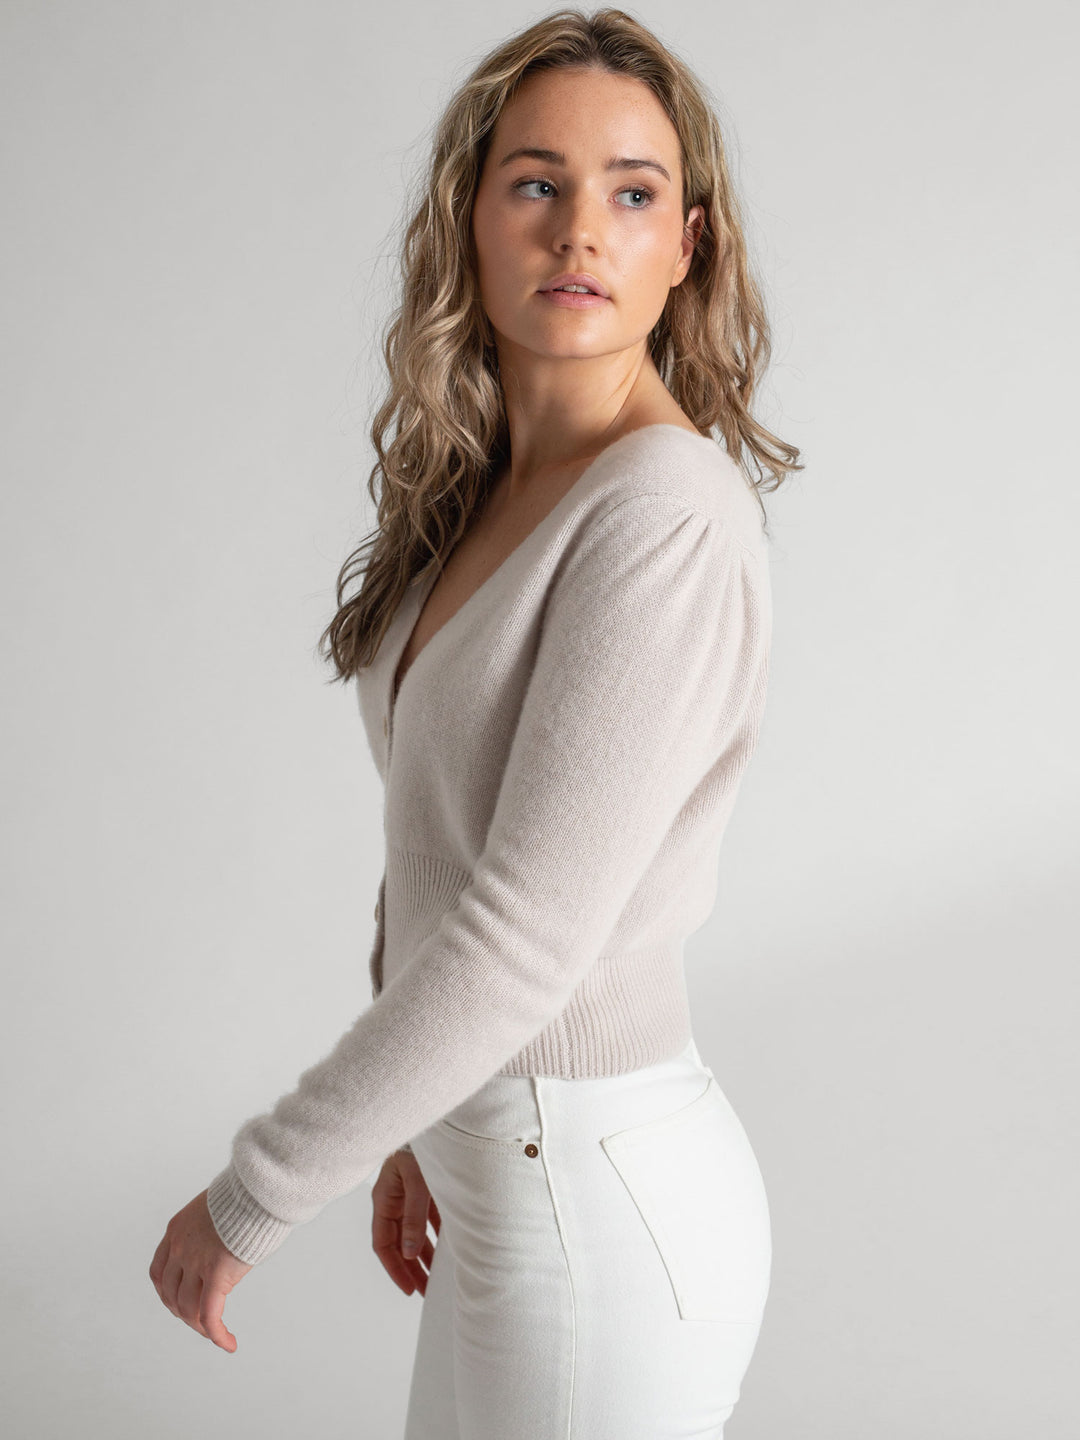  Cashmere cardigan puff sleeves, long sleeves, 100% pure cashmere, Scandinavian design, color: Cold Creme.